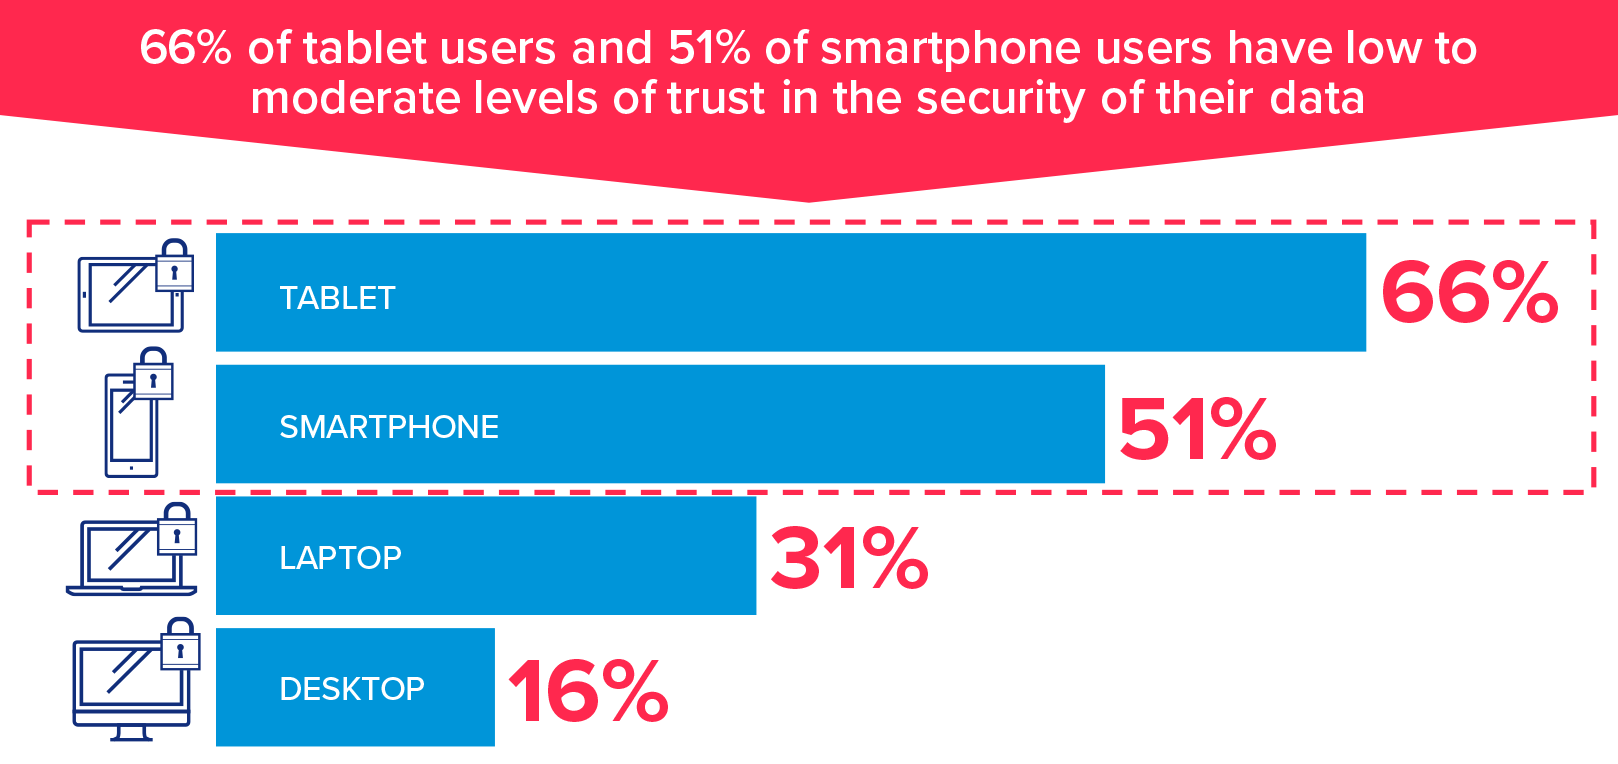 66% of tablet users and 51% of smartphone users have low to moderate levels of trust in the security of their data